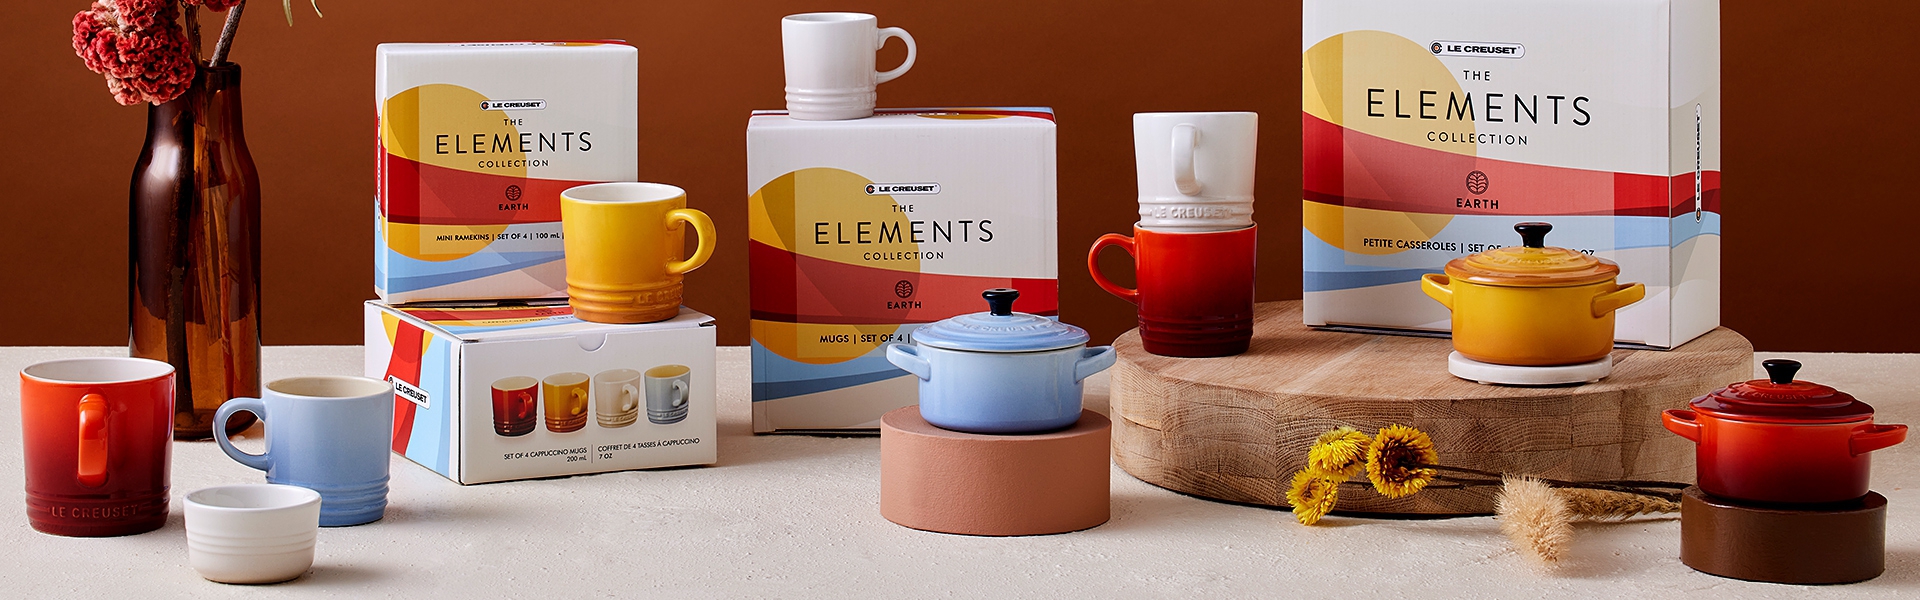 ELEMENTS COLLECTION